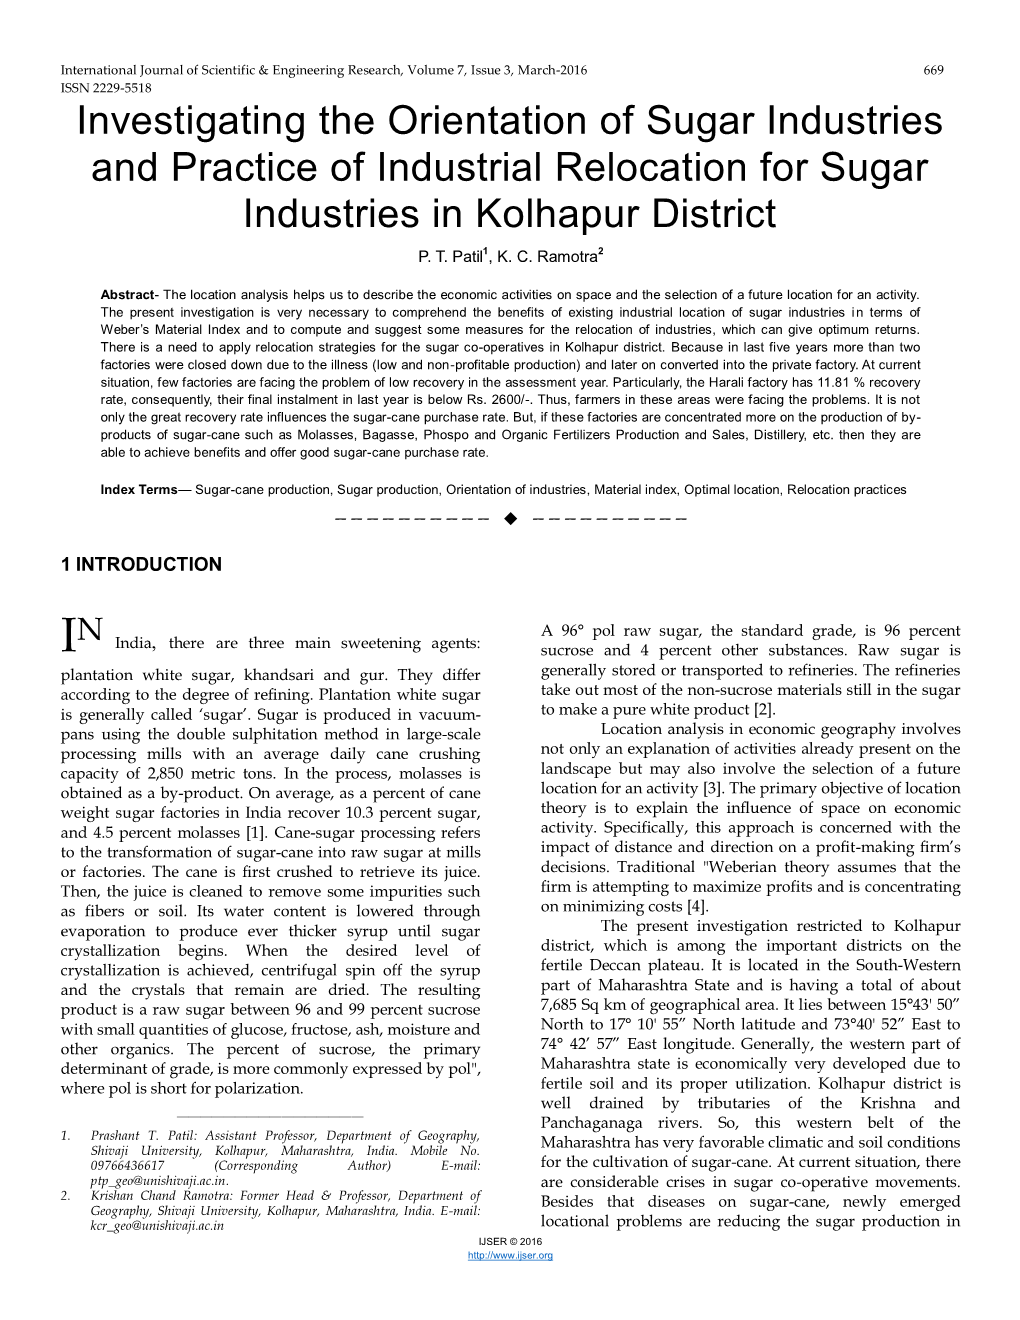 Investigating the Orientation of Sugar Industries and Practice of Industrial Relocation for Sugar Industries in Kolhapur District P